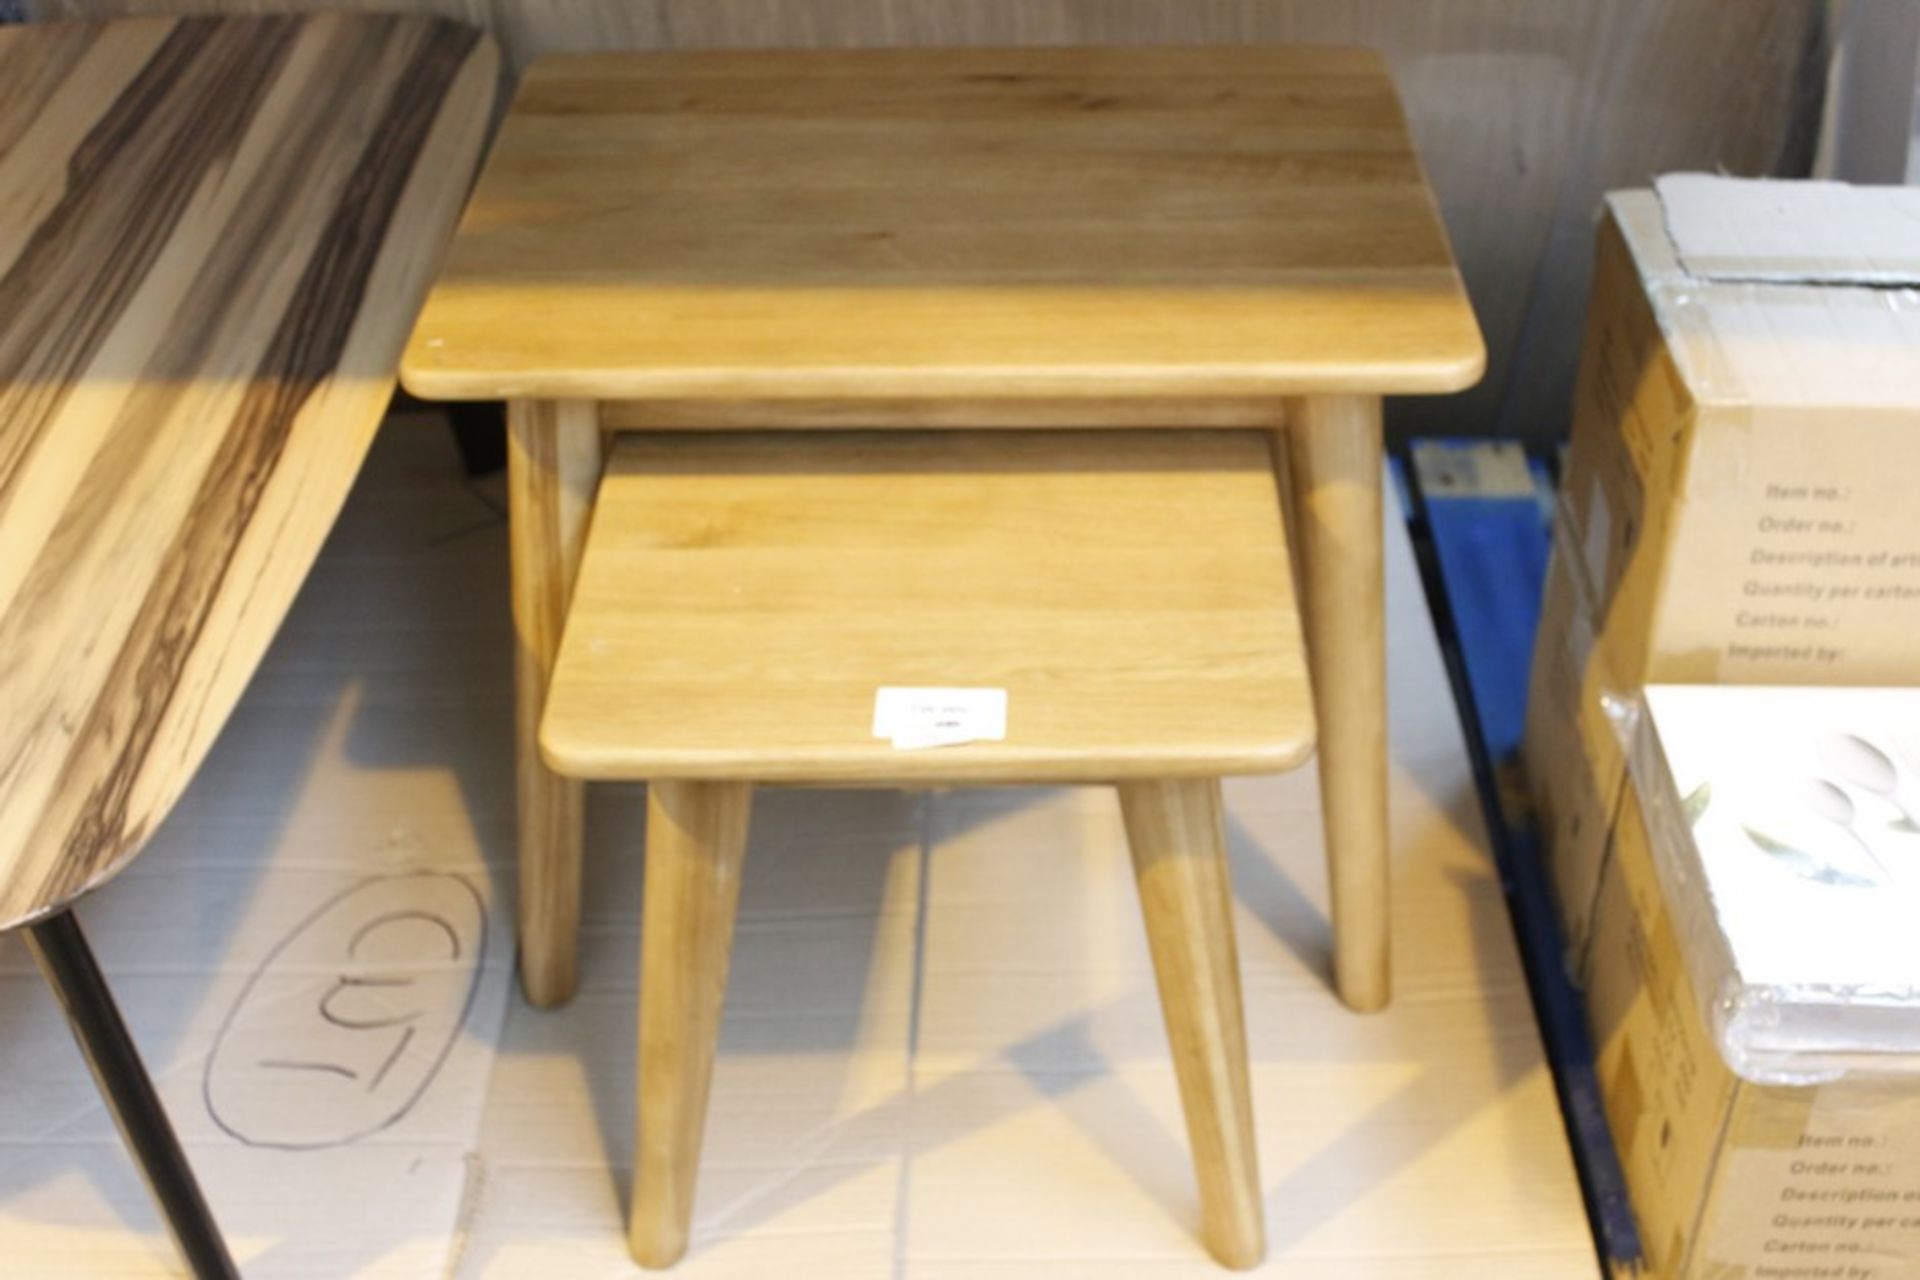 1 x SOLID WOODEN BRODY NEST OF TABLES RRP £250  *PLEASE NOTE THAT THE BID PRICE IS MULTIPLIED BY THE